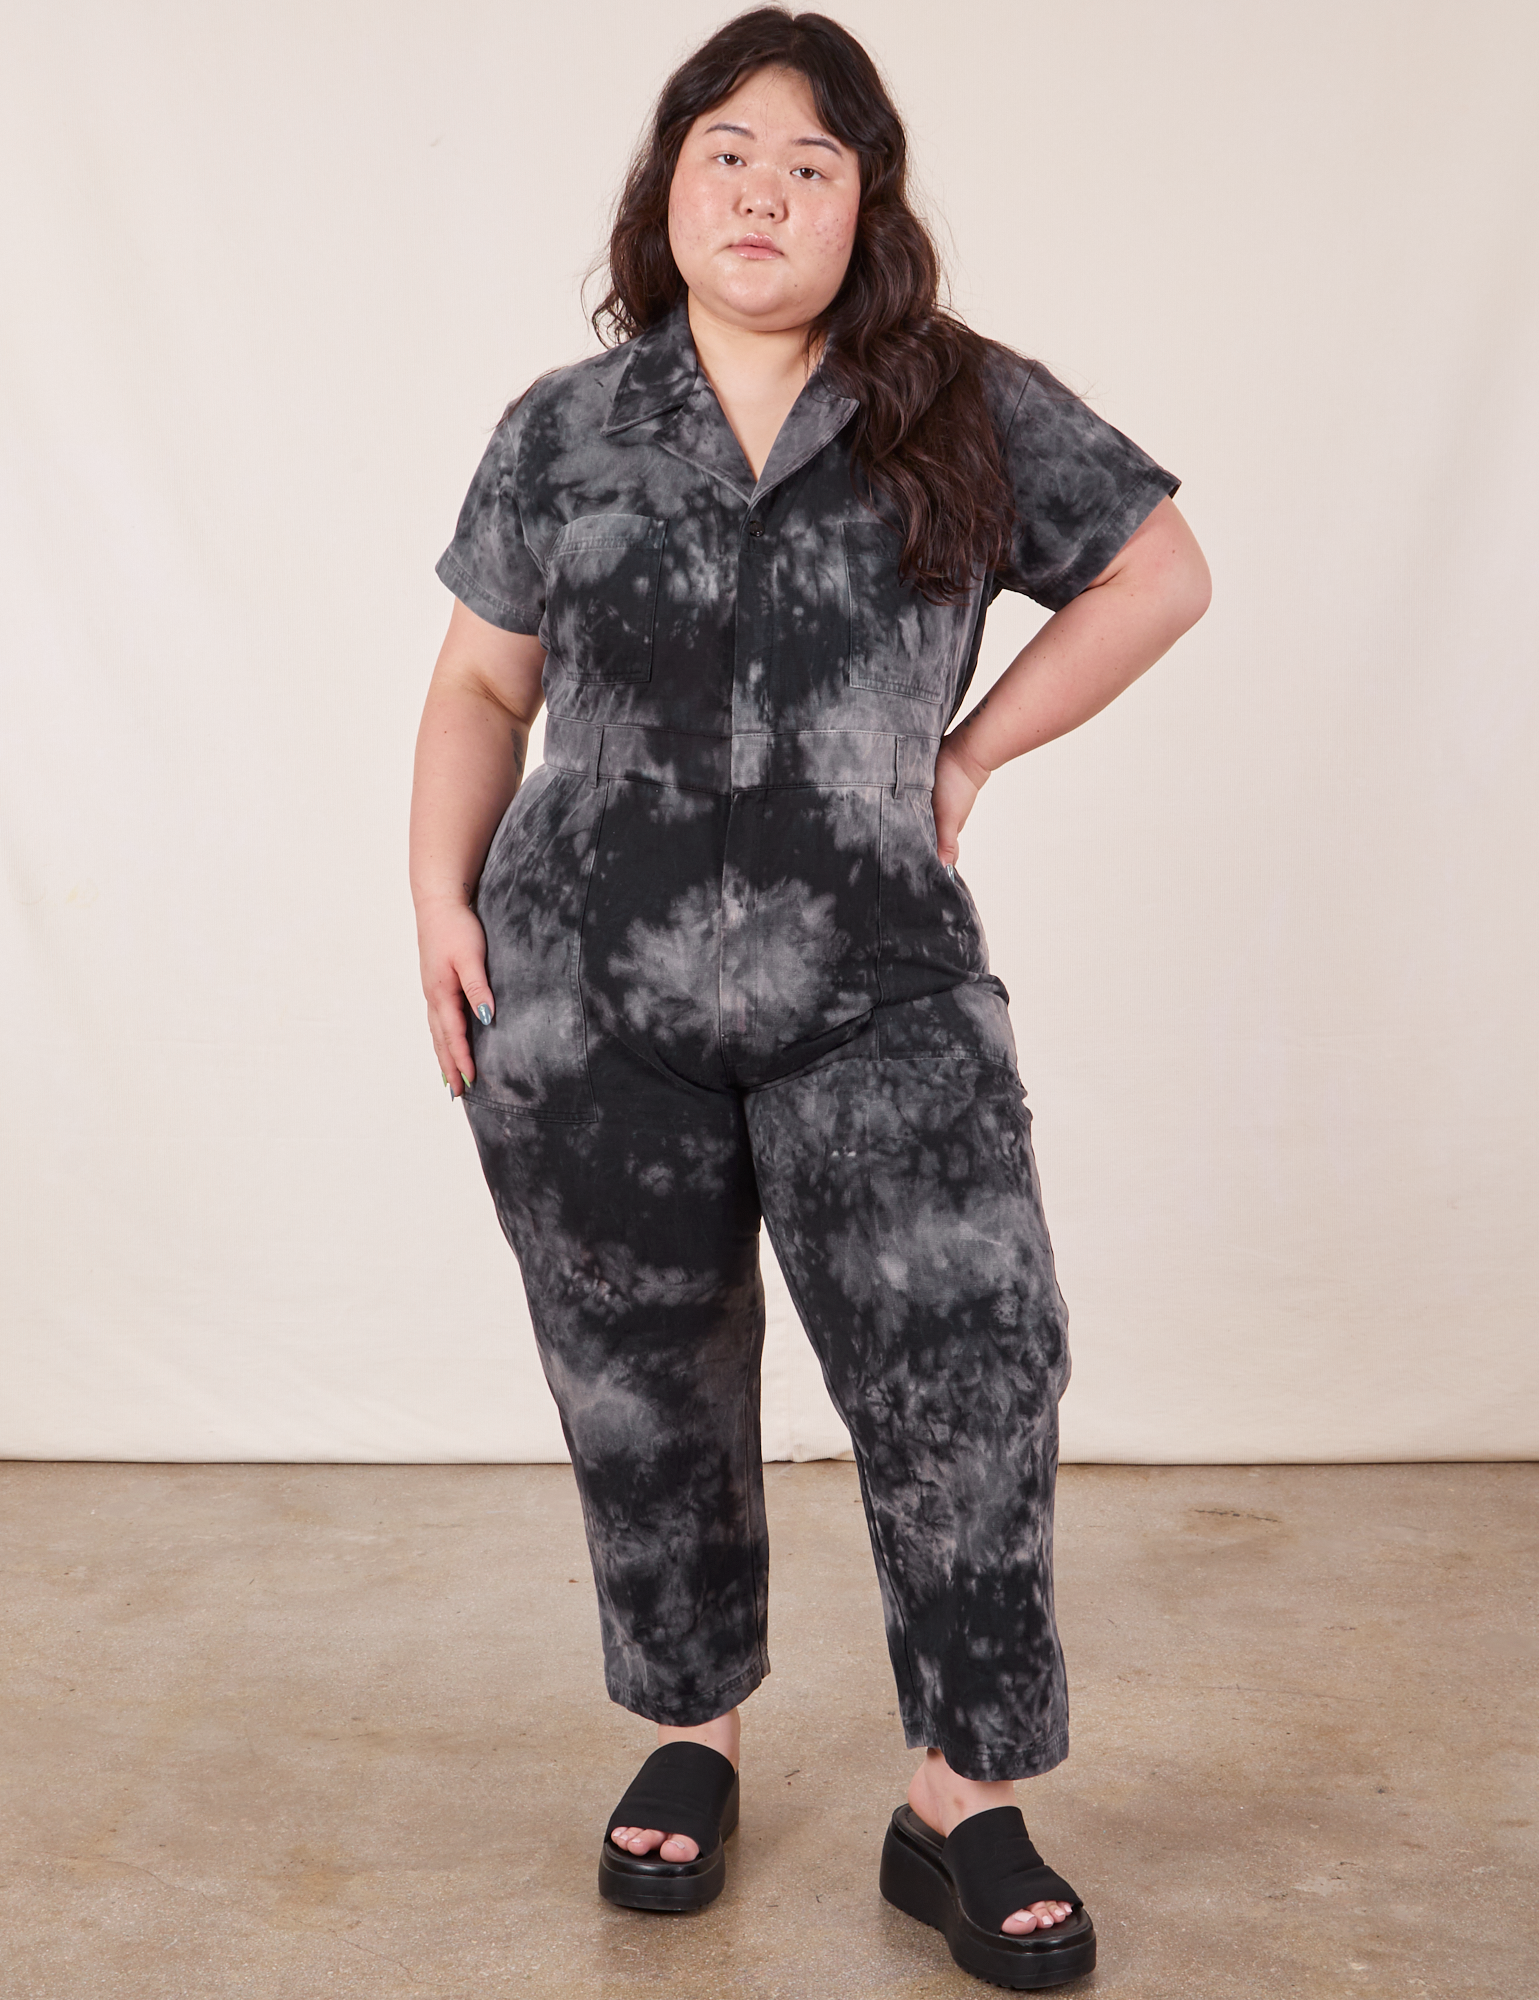 Ashley is 5&#39;7&quot; and wearing 1XL Petite Short Sleeve Jumpsuit in Black Magic Waters